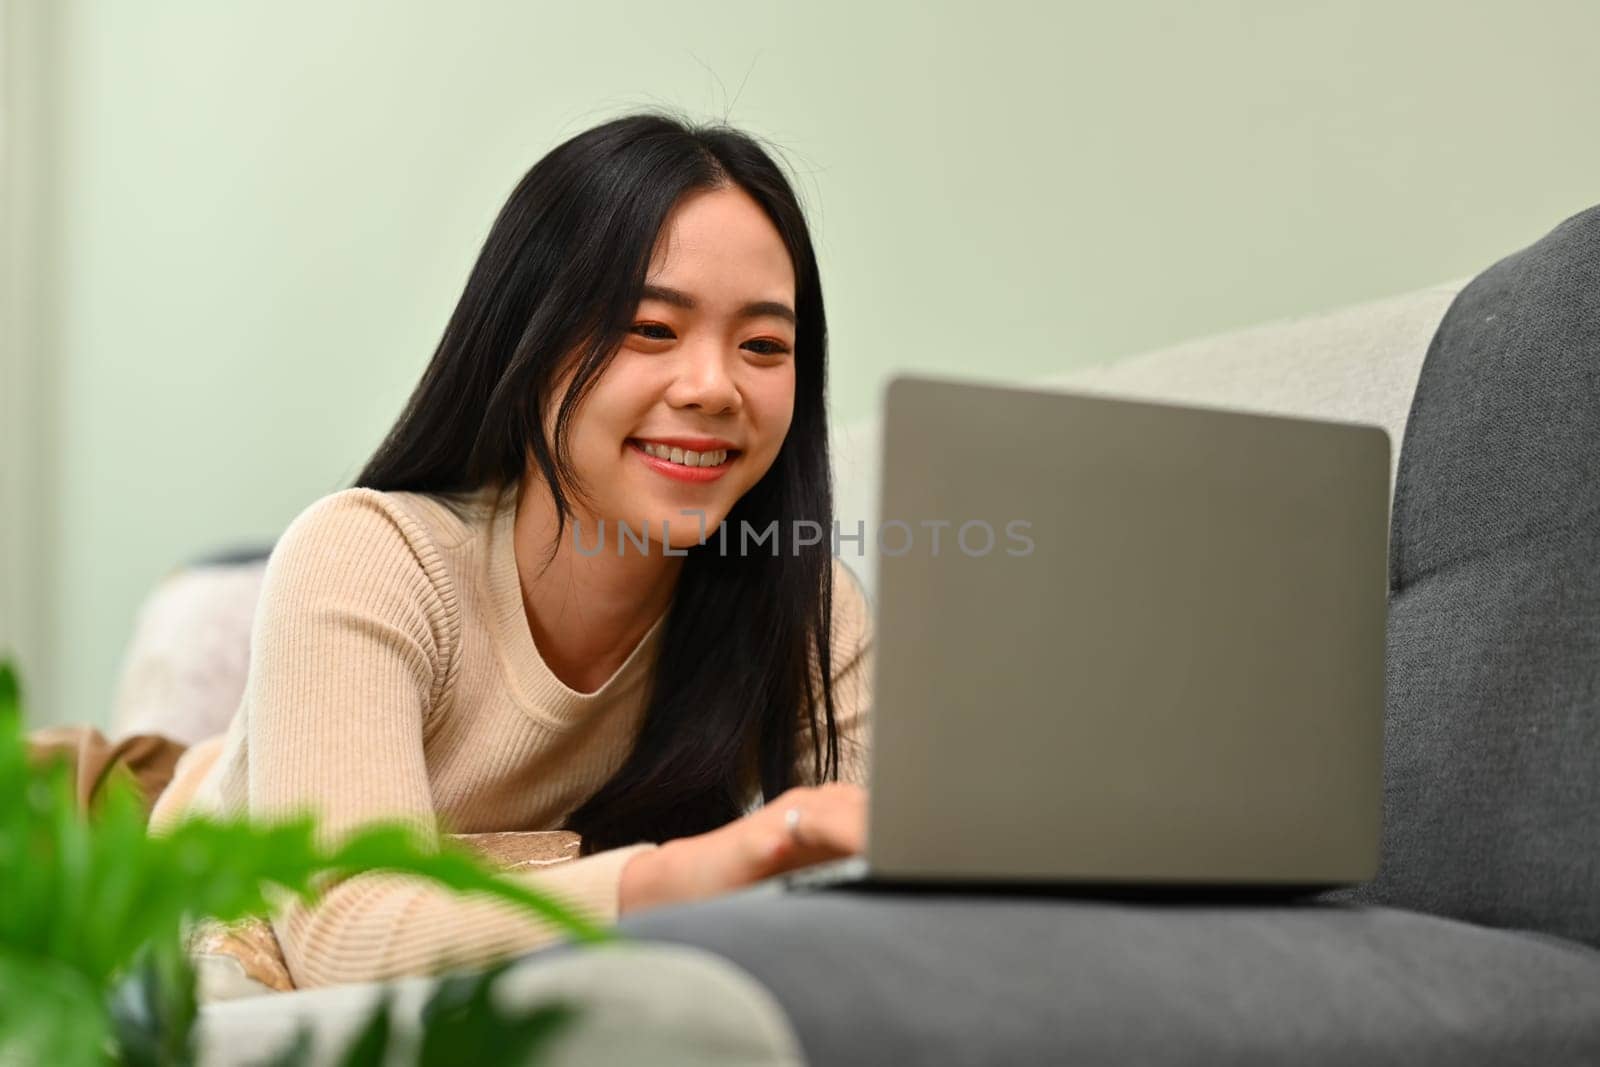 Carefree young woman lying on couch and using laptop. Technology, people and lifestyle concept.